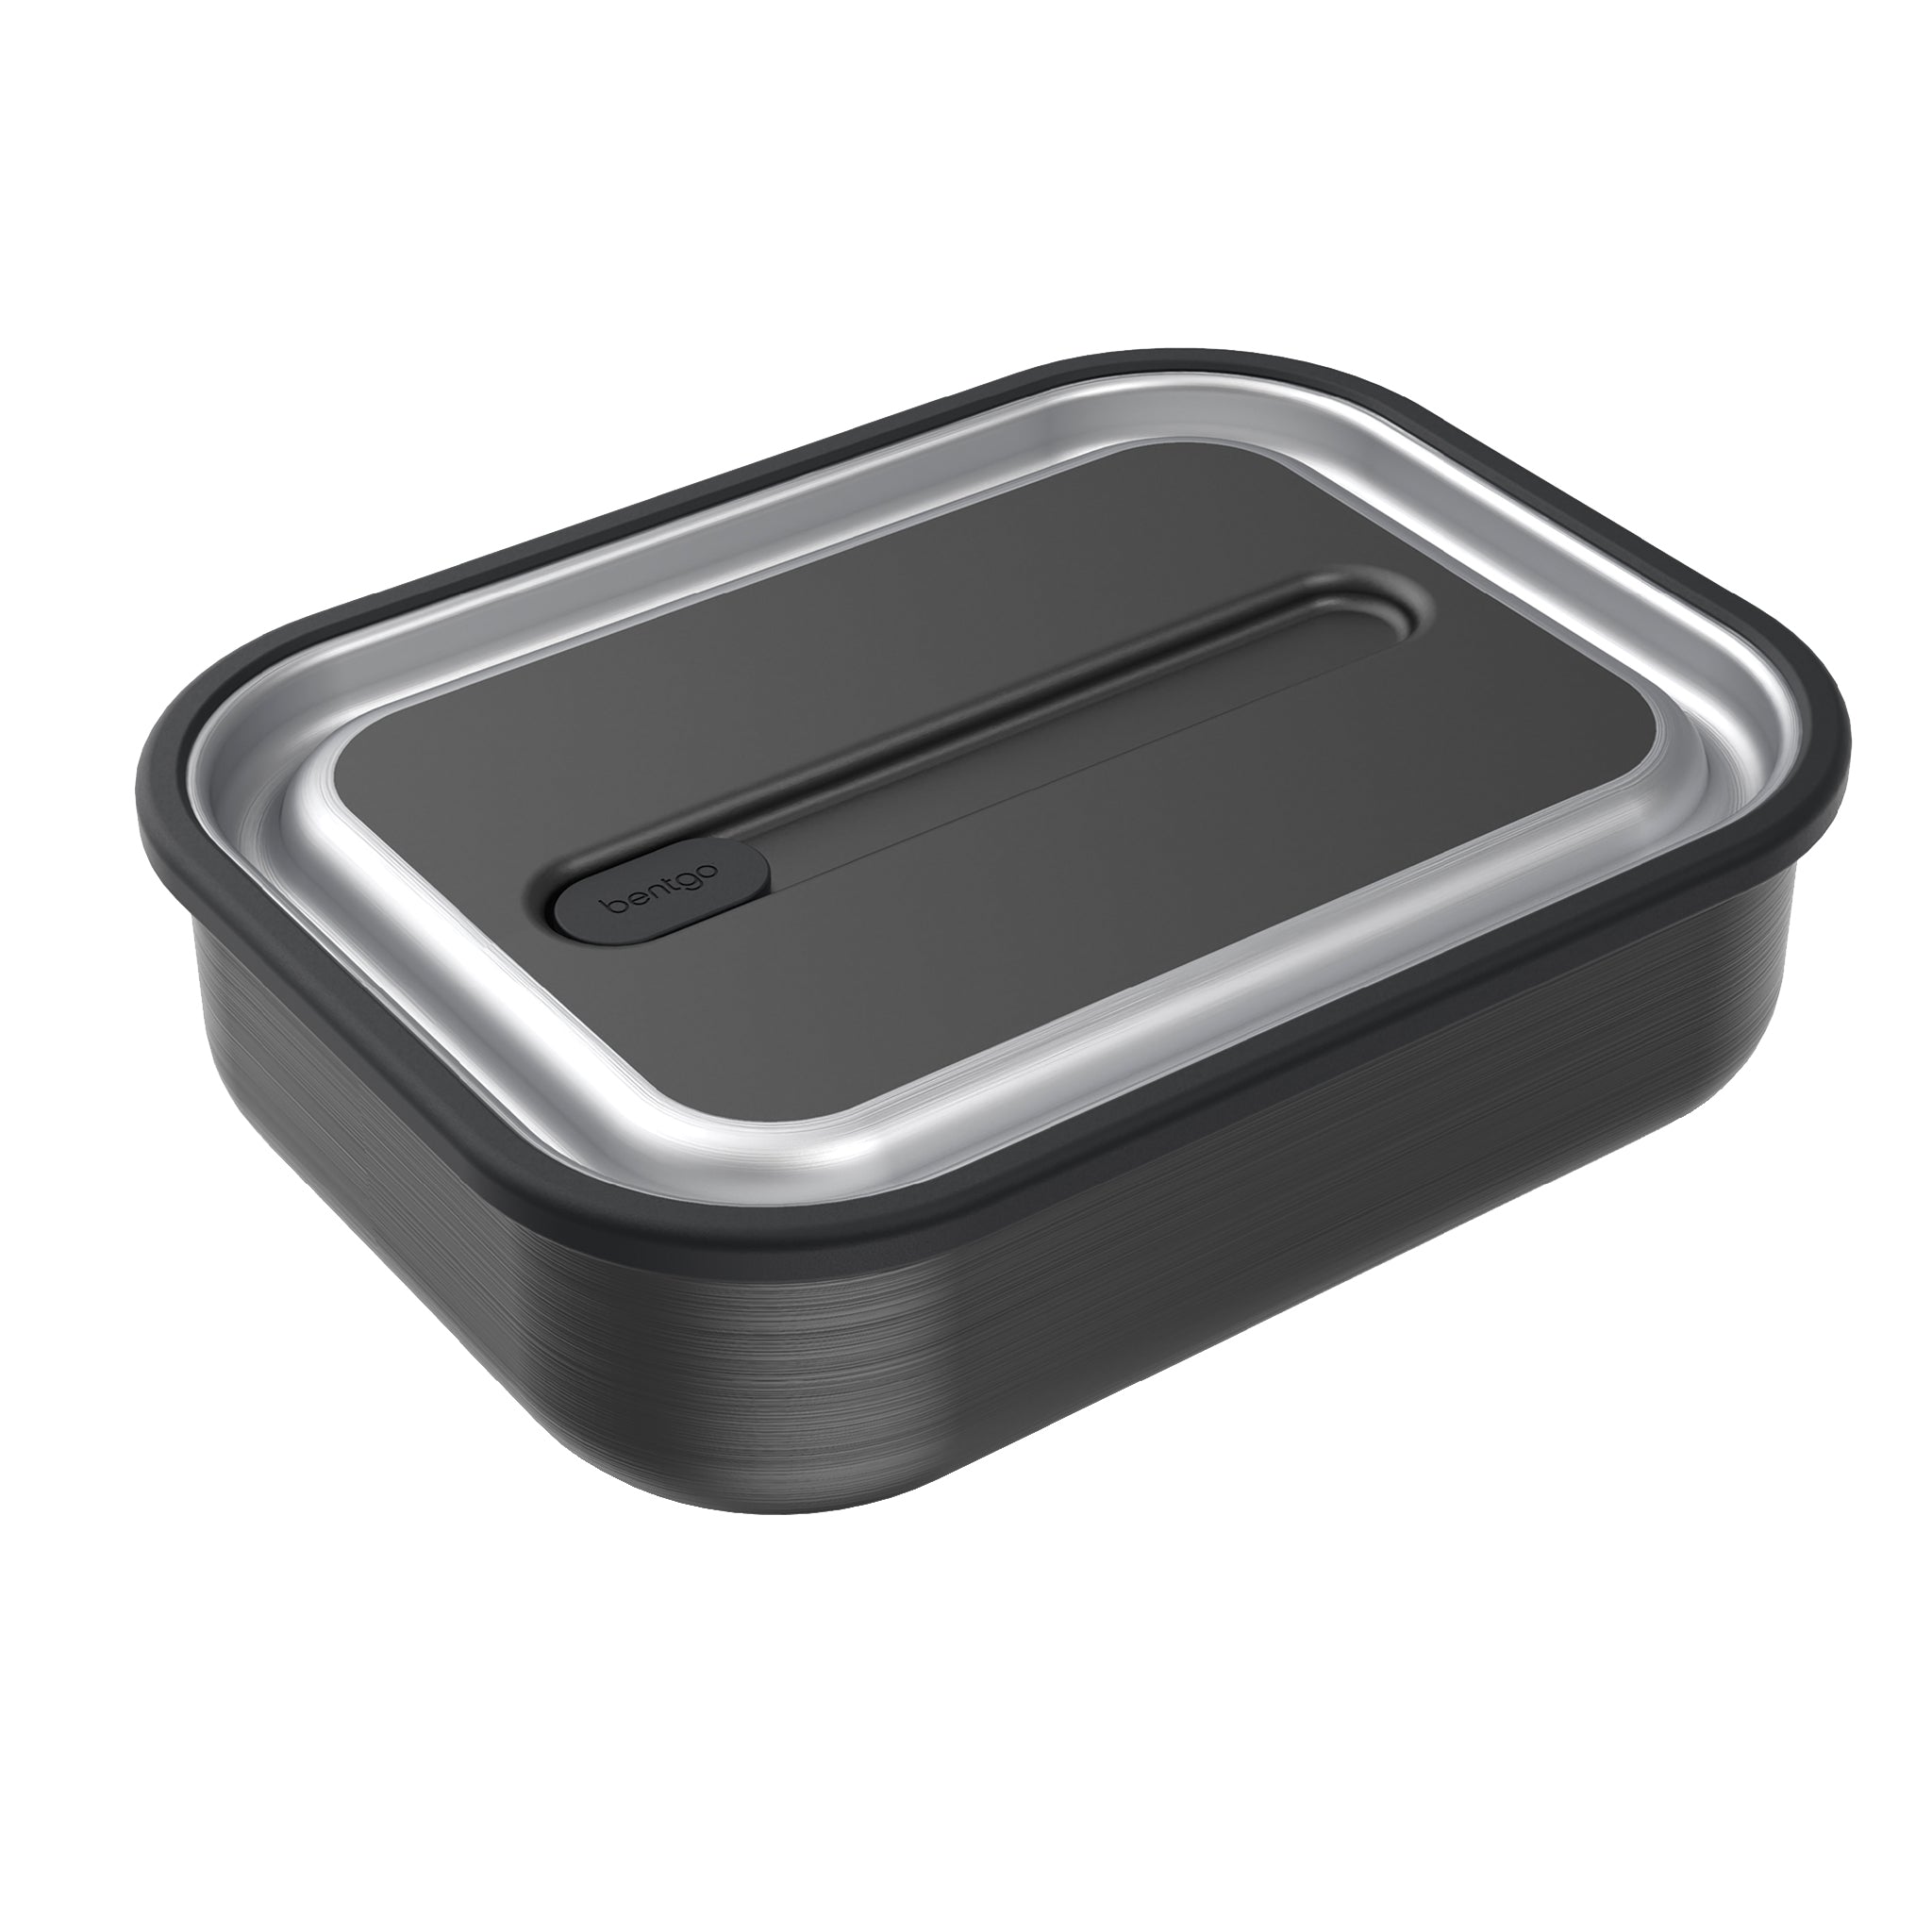 Bentgo Stainless Steel Leak-Proof Lunch Box